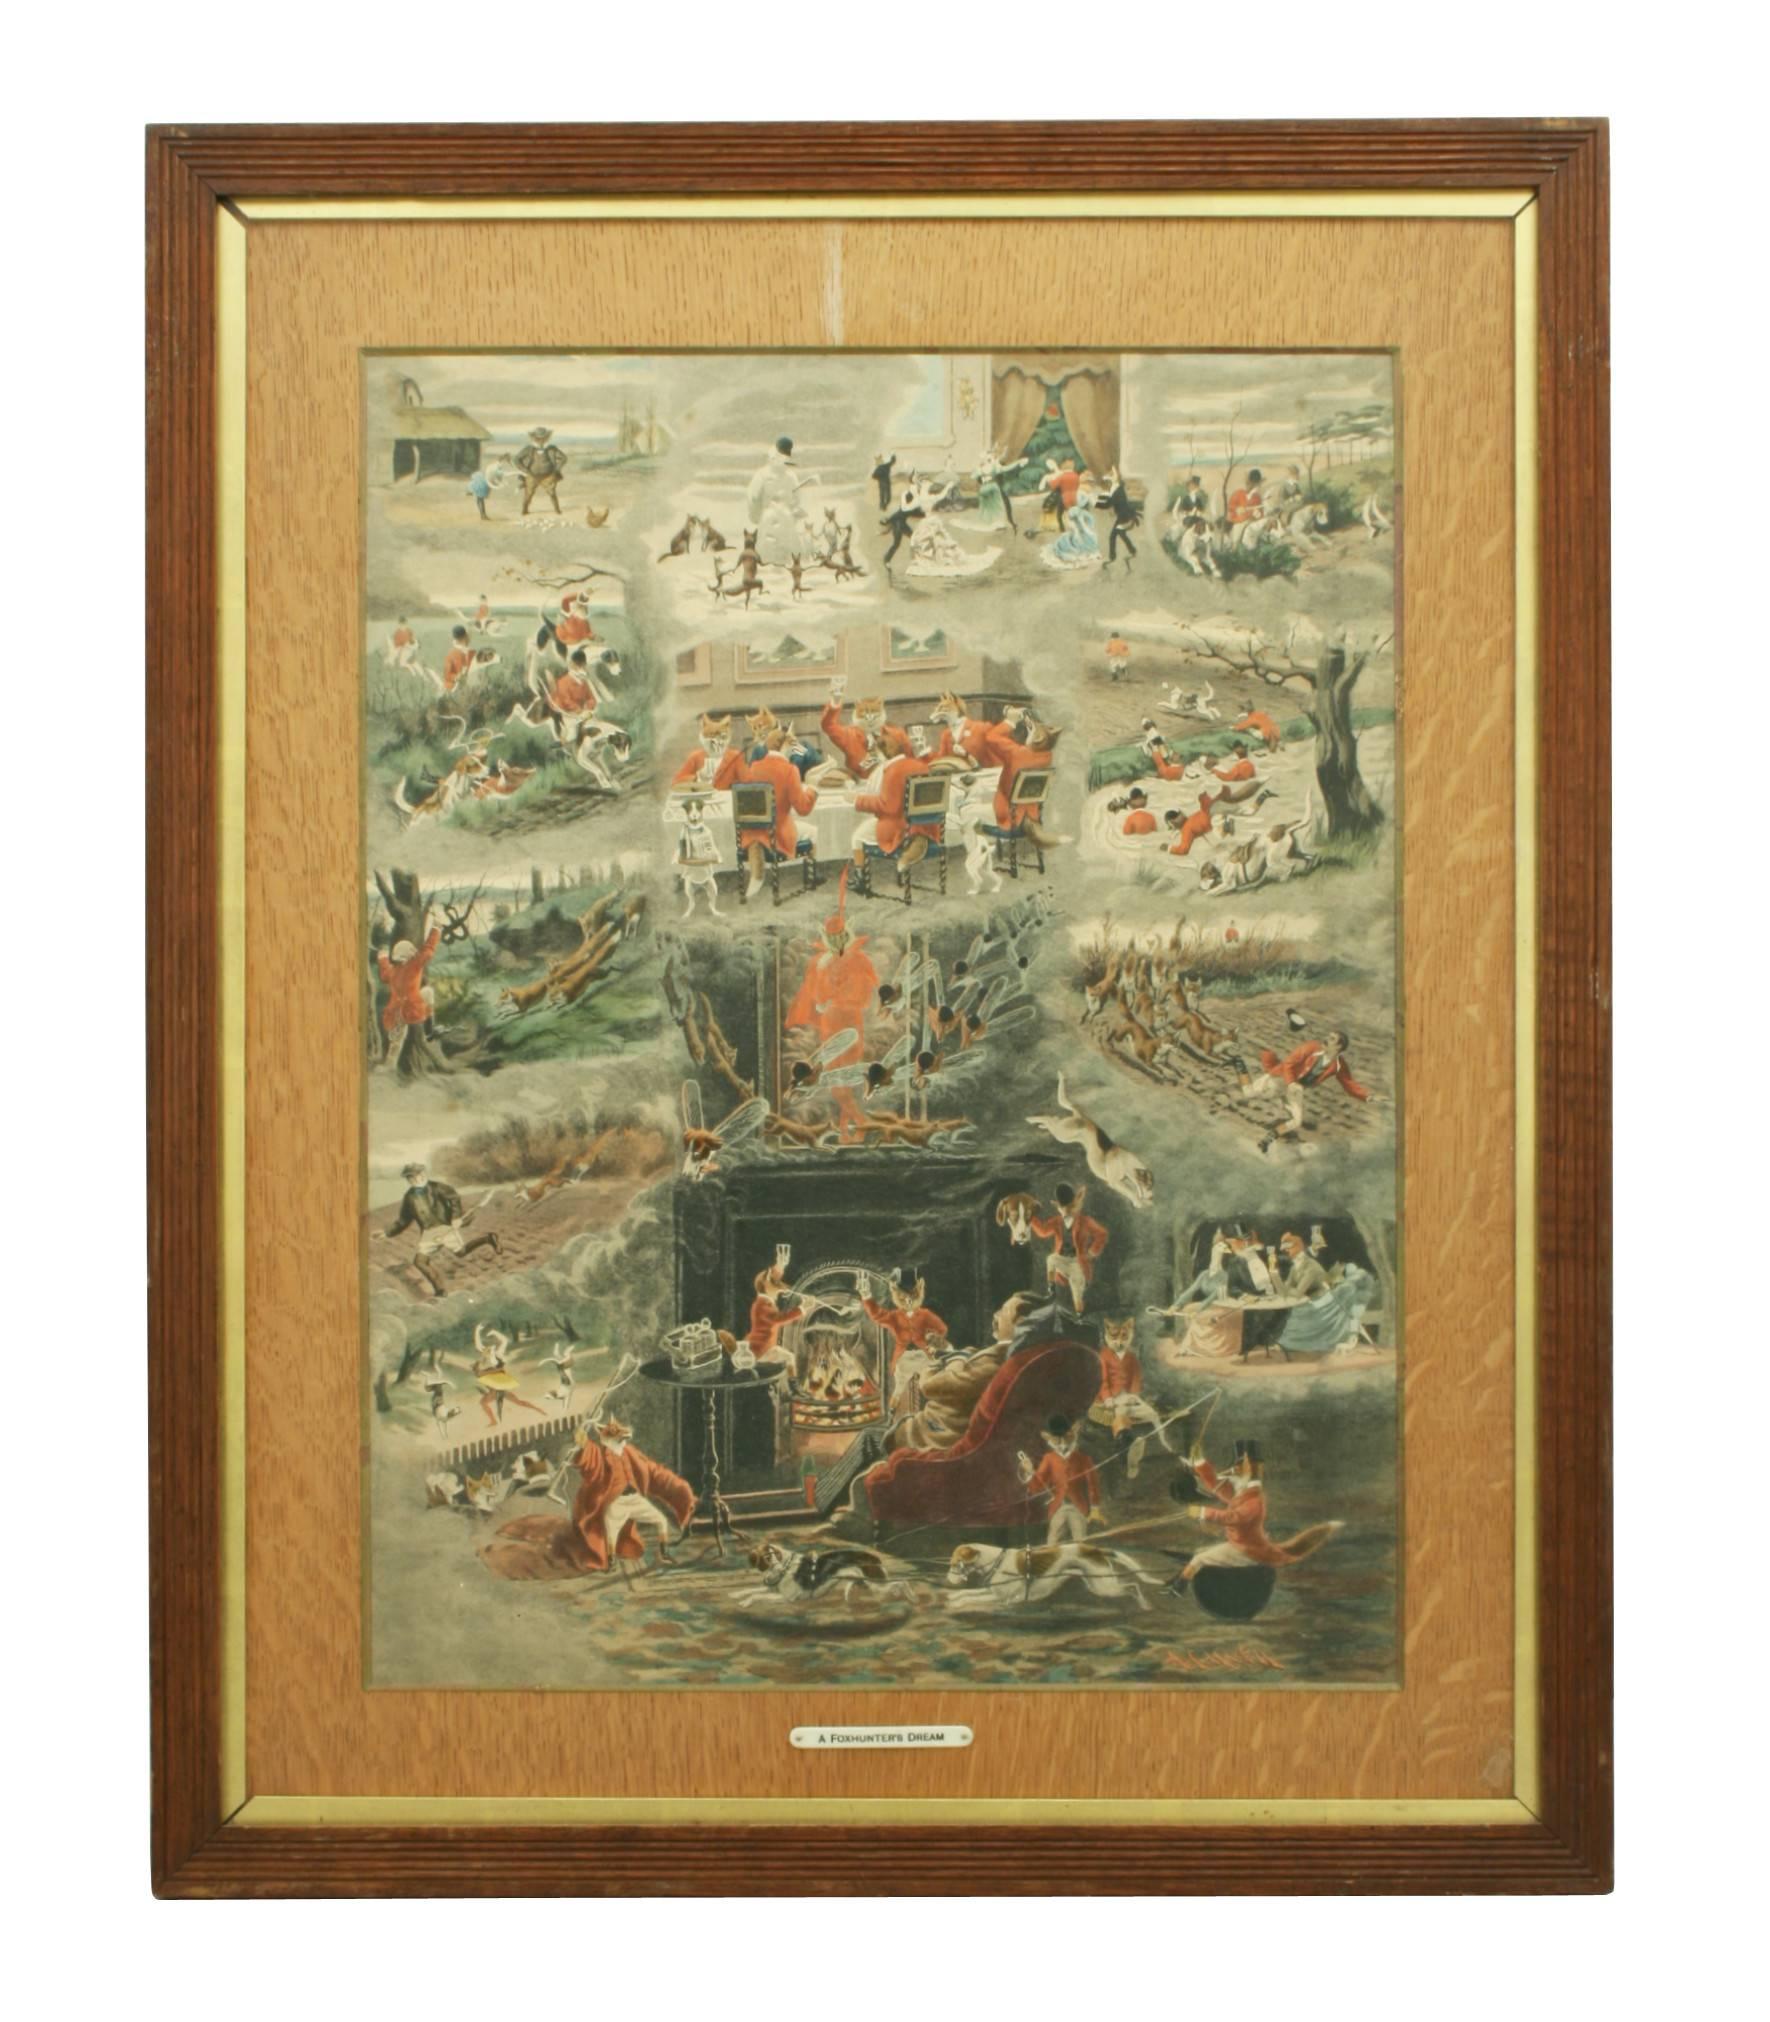 A fine equestrian hunting print by Alfred Havell entitled 'A Foxhunter's Dream' in original oak frame with gold slip and oak mount. The lithograph is hand colored and published by Fores. The mount is with titled ivorine plaque.

Alfred Charles